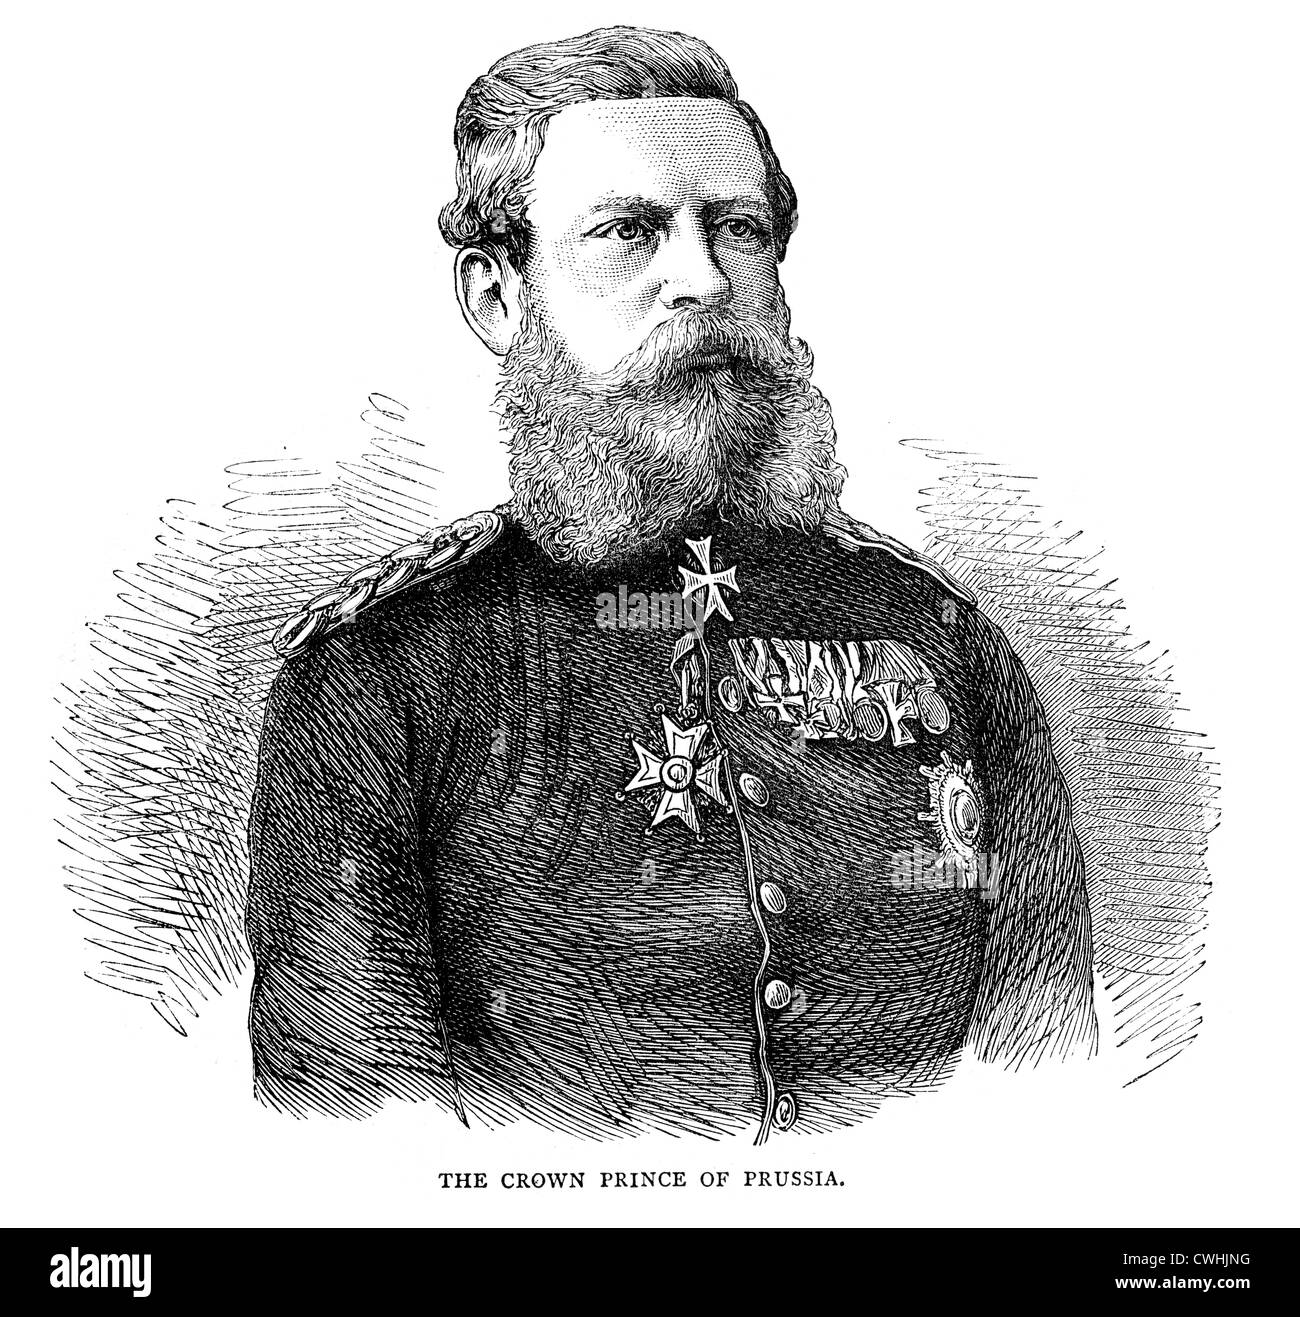 Frederick III (18 October 1831 – 15 June 1888) was German Emperor and King of Prussia for 99 days in 1888. Stock Photo